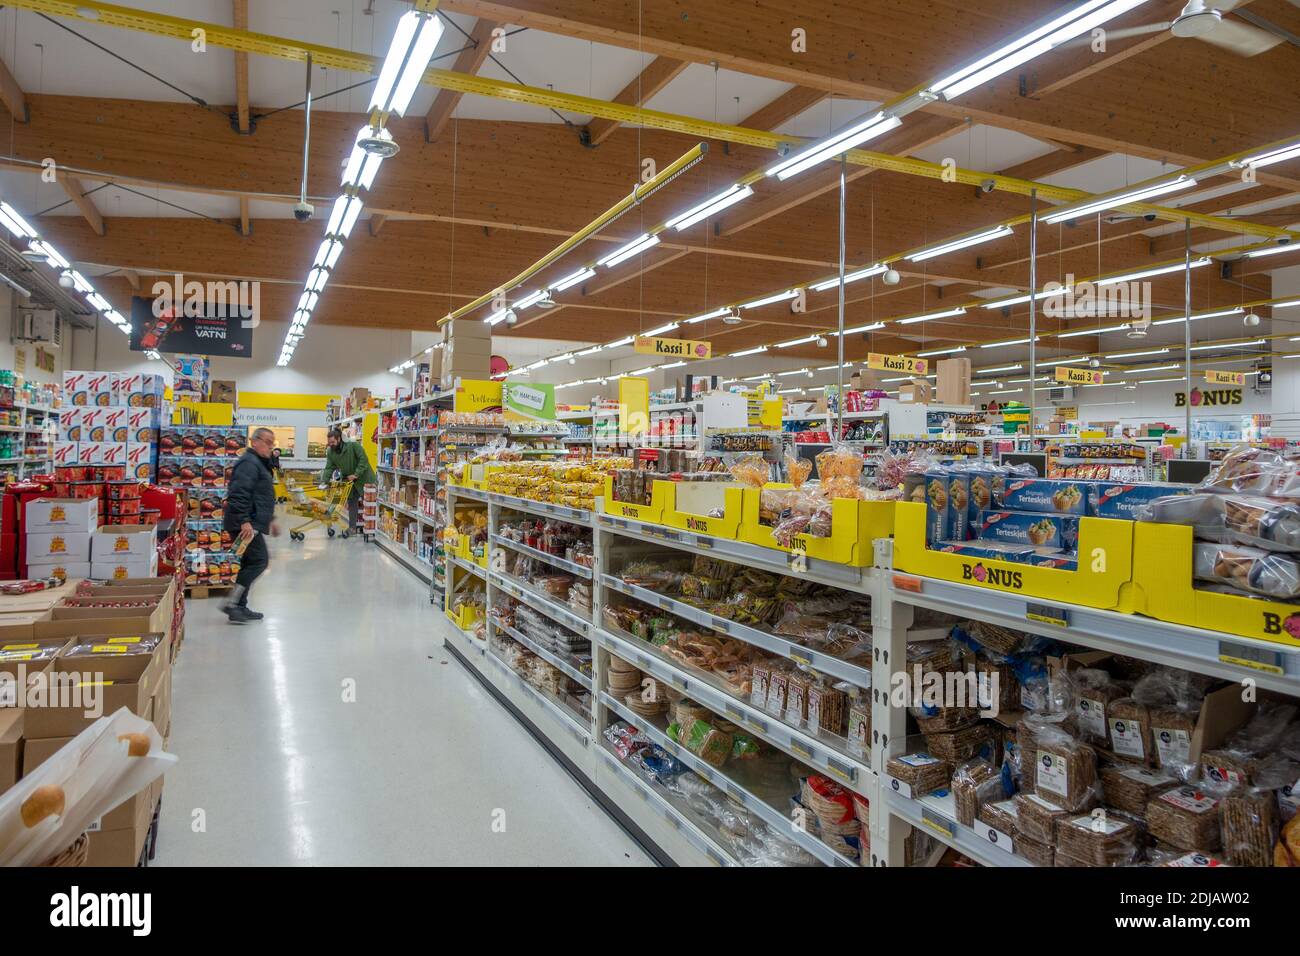 Inside A Bonus Supermarket In Iceland Bonus Is A Chain Of Icelandic Discount Value Supermarkets Throughout Iceland Stock Photo